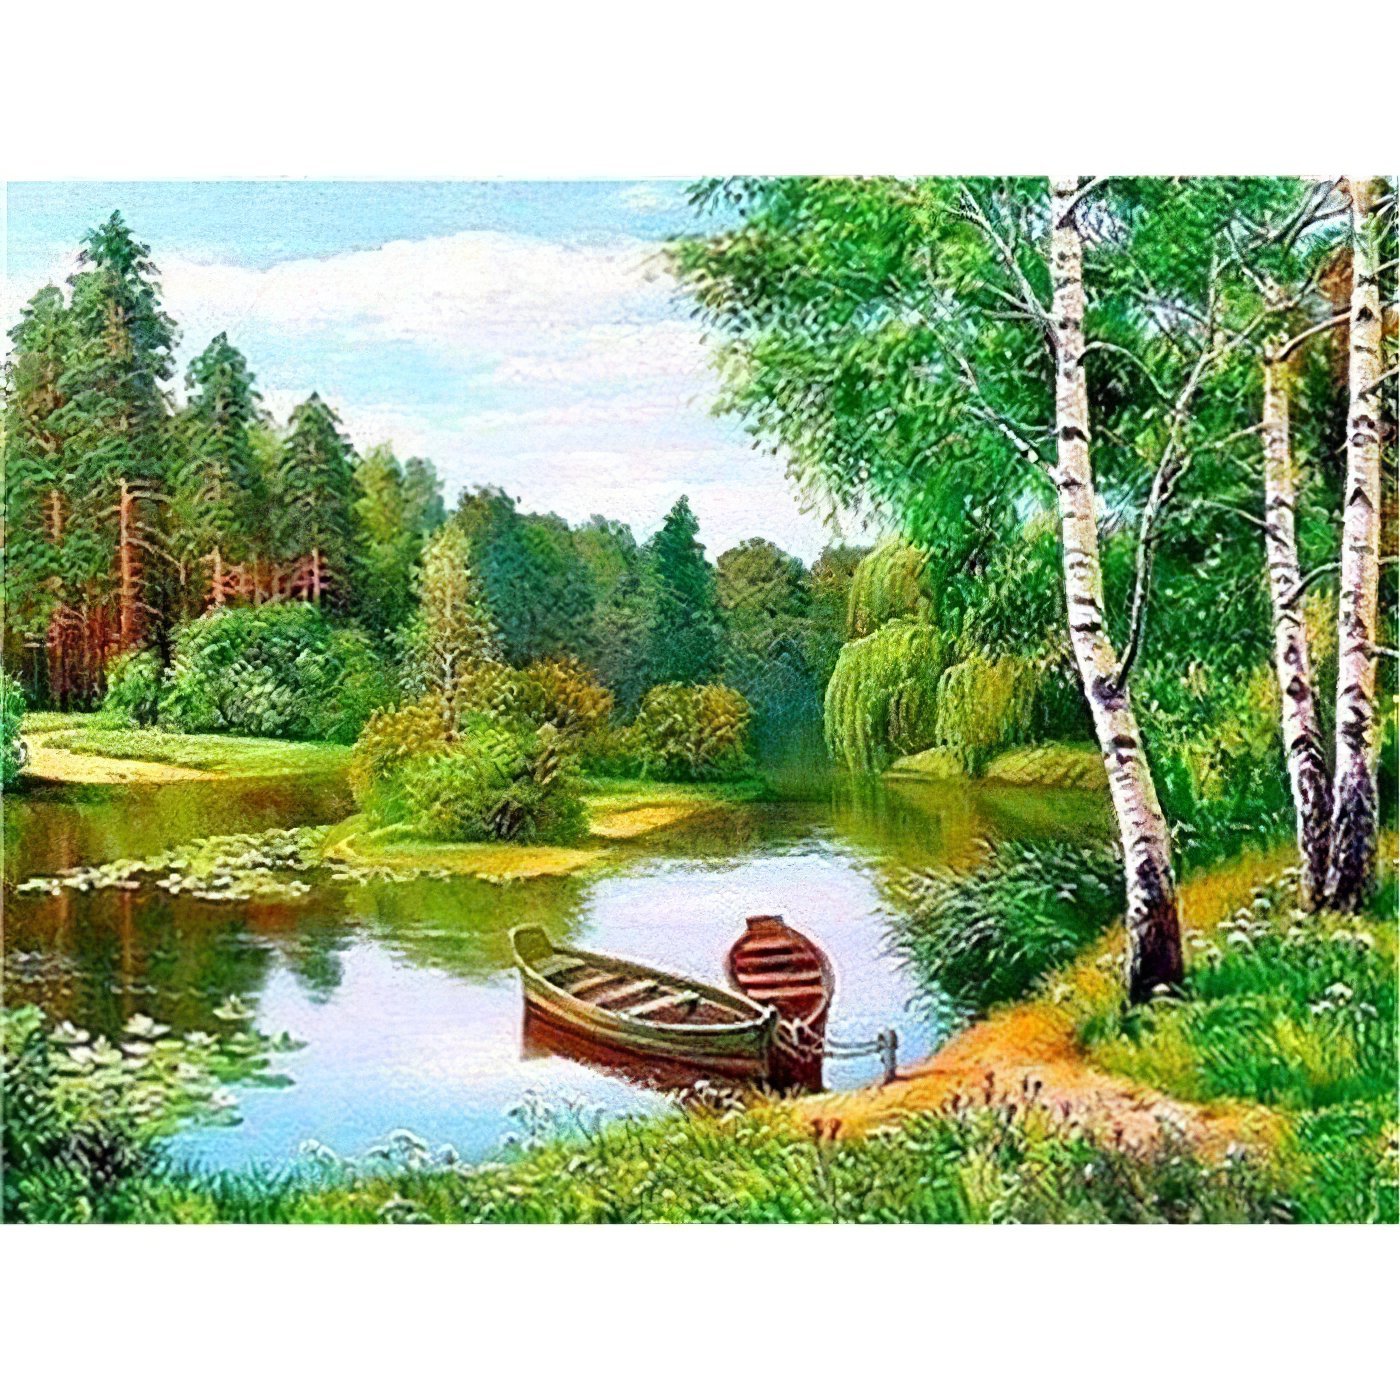 Boat And Green Forest